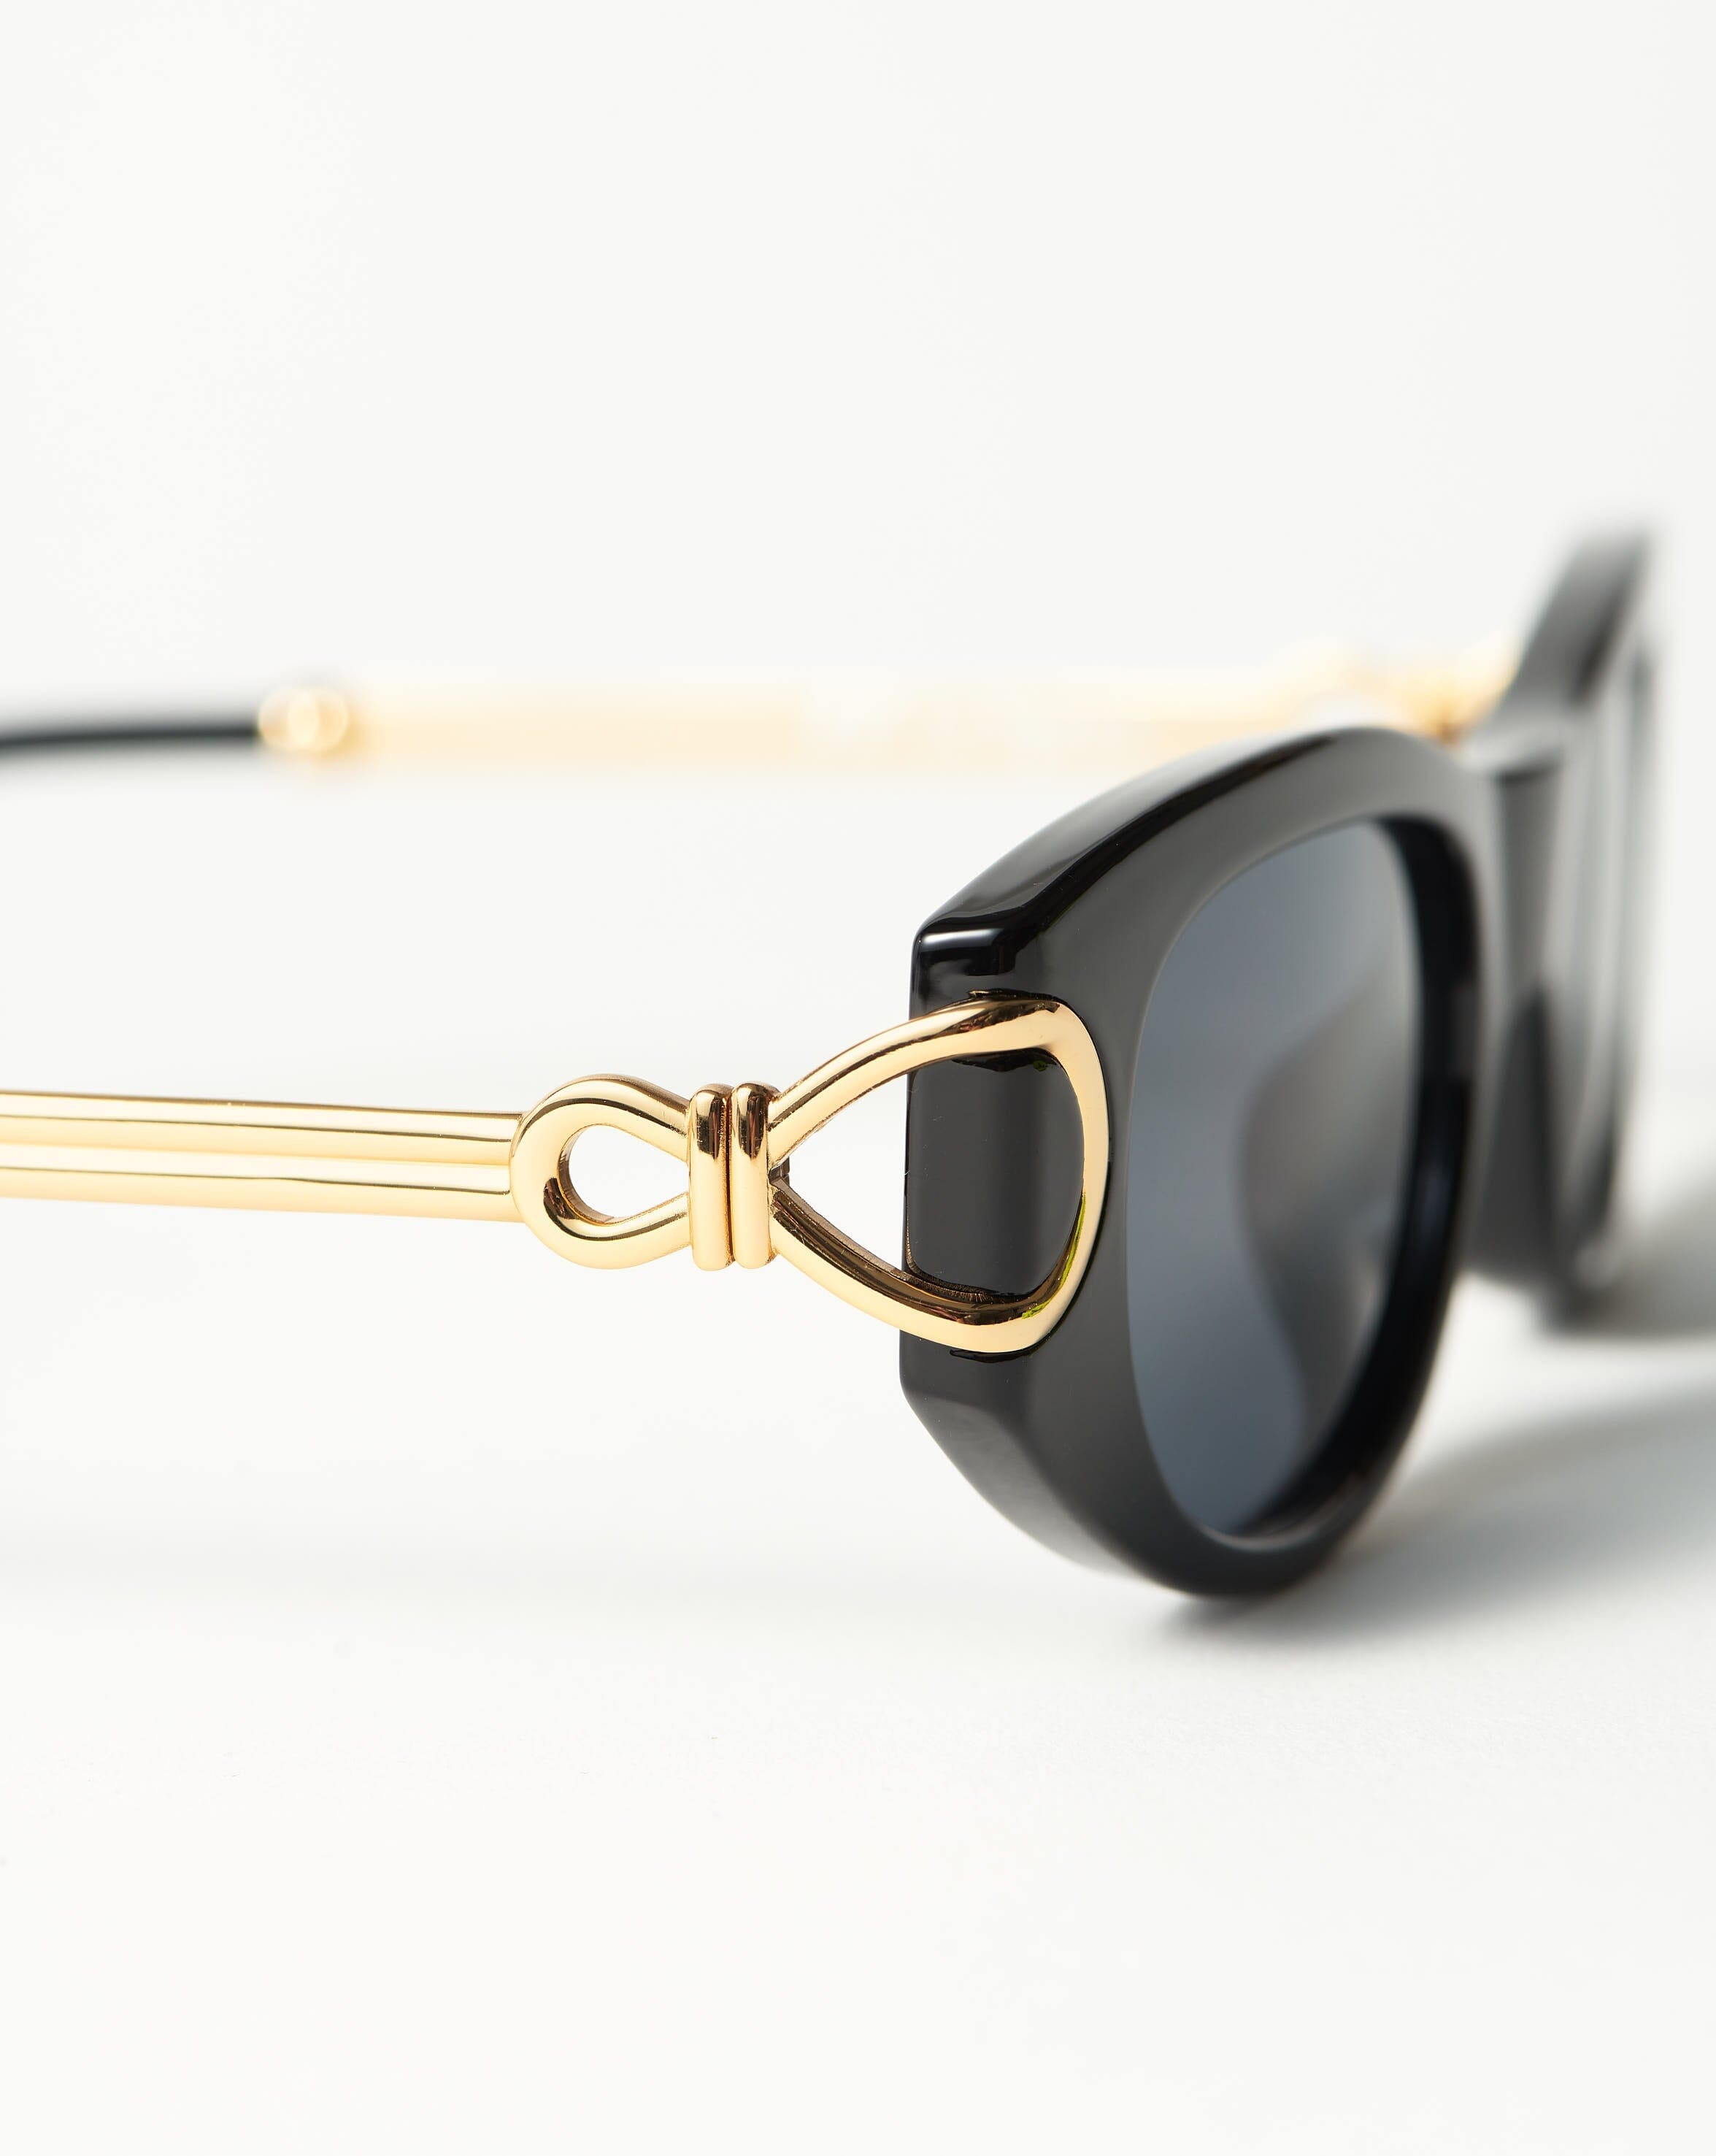 MISSOMA x LE SPECS SERPENS LINK SUNGLASSES TORTOISE WITH PEARL